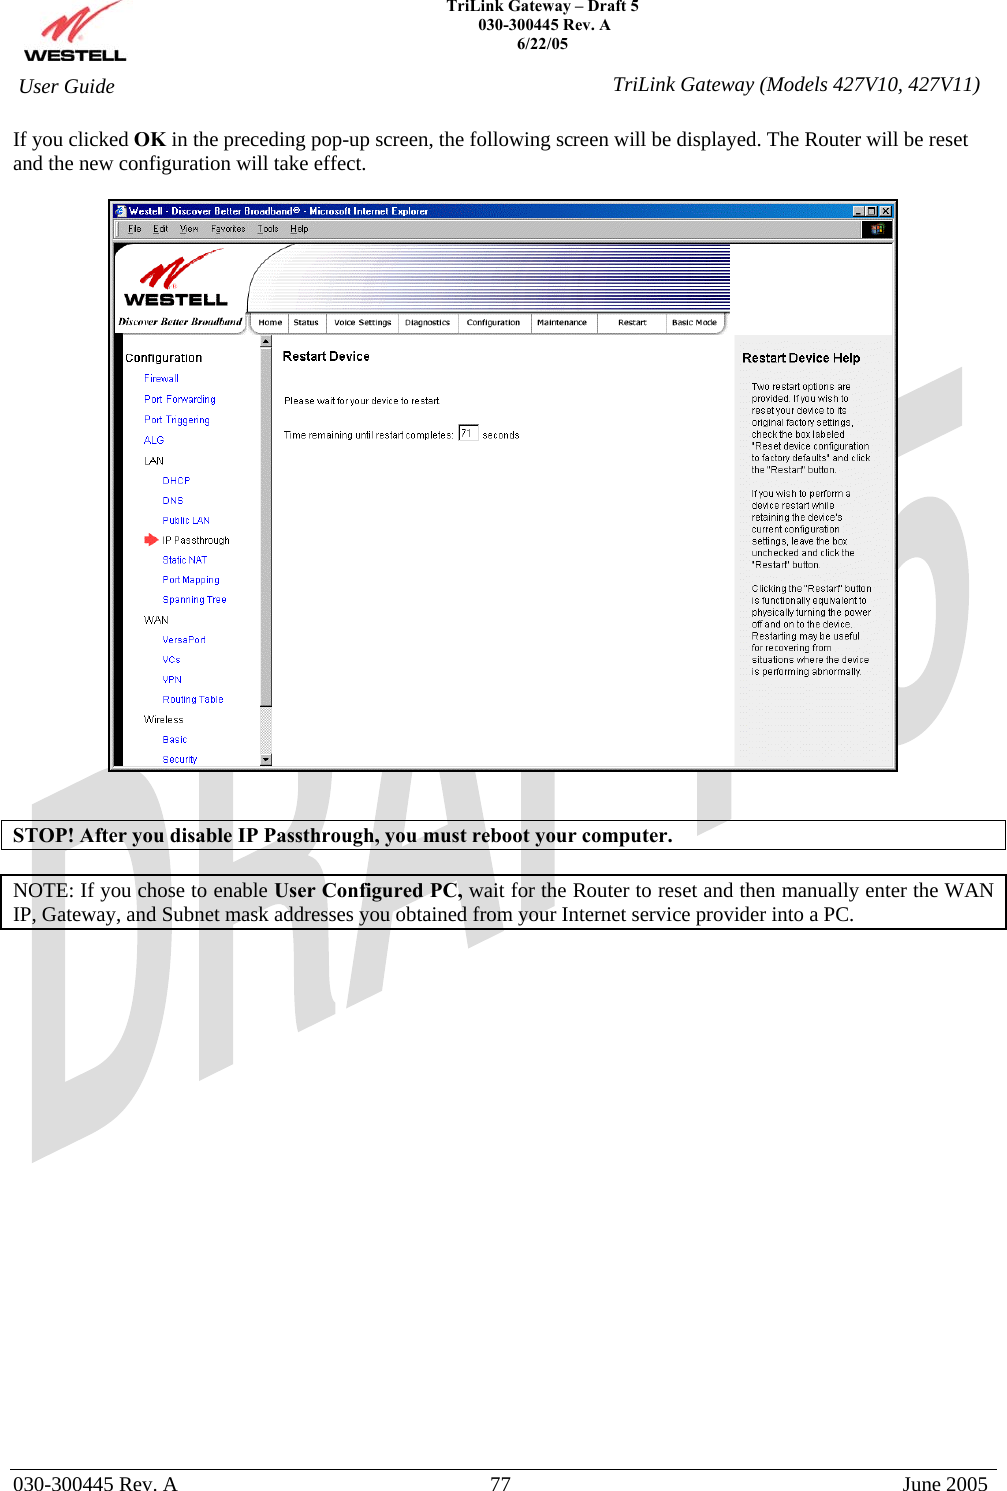    TriLink Gateway – Draft 5   030-300445 Rev. A 6/22/05   030-300445 Rev. A  77  June 2005  User Guide  TriLink Gateway (Models 427V10, 427V11)If you clicked OK in the preceding pop-up screen, the following screen will be displayed. The Router will be reset and the new configuration will take effect.      STOP! After you disable IP Passthrough, you must reboot your computer.  NOTE: If you chose to enable User Configured PC, wait for the Router to reset and then manually enter the WAN IP, Gateway, and Subnet mask addresses you obtained from your Internet service provider into a PC.                       